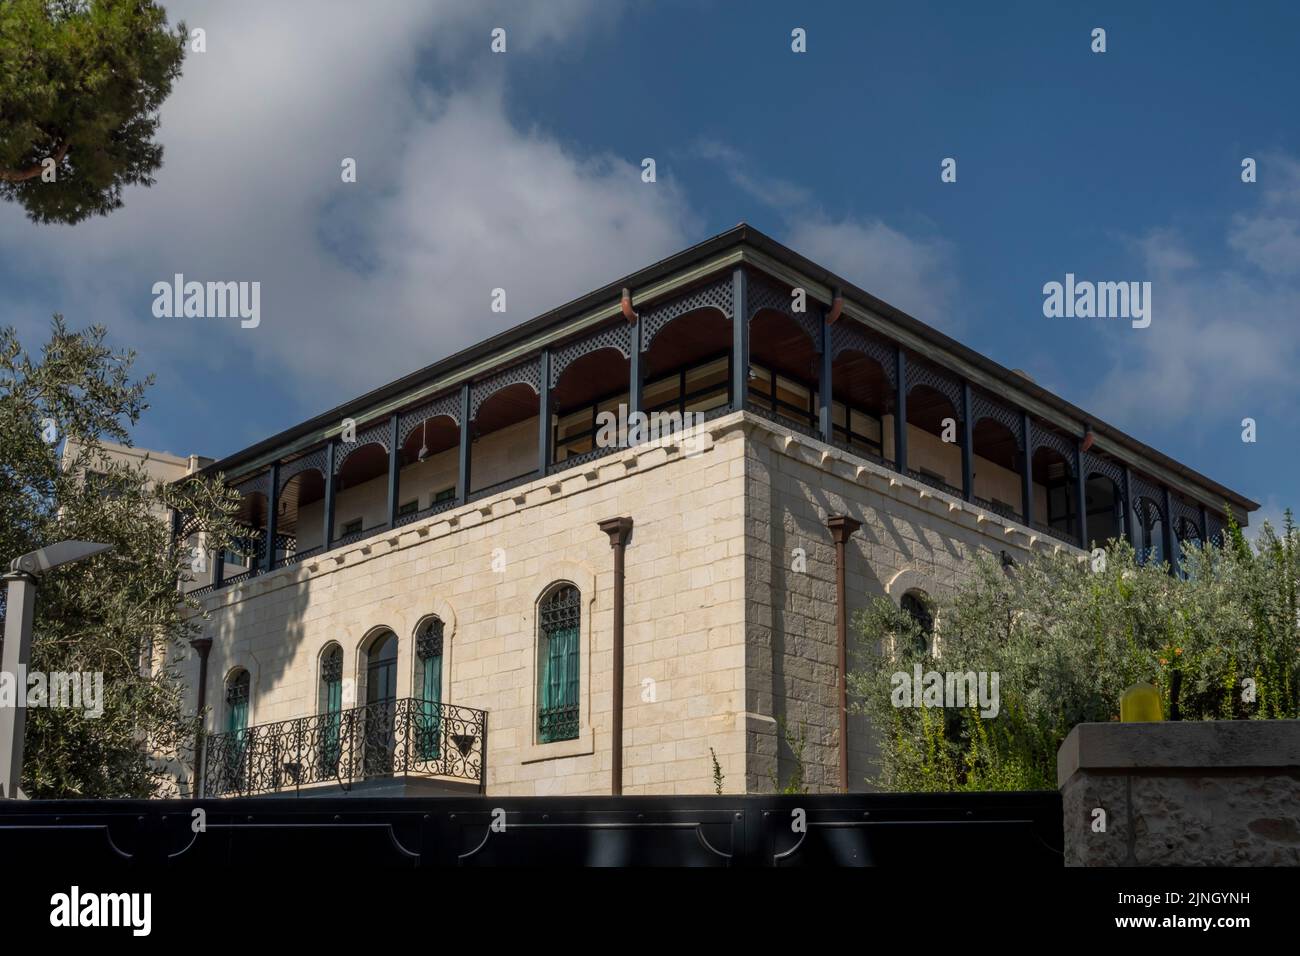 A renovated late-19th century house now owned by Jewish American billionaire Joseph Mordechai Tabak, who serves as the CEO of Princeton Holdings a New York City based real estate investment firm located on Ethiopia street in West Jerusalem Israel Stock Photo